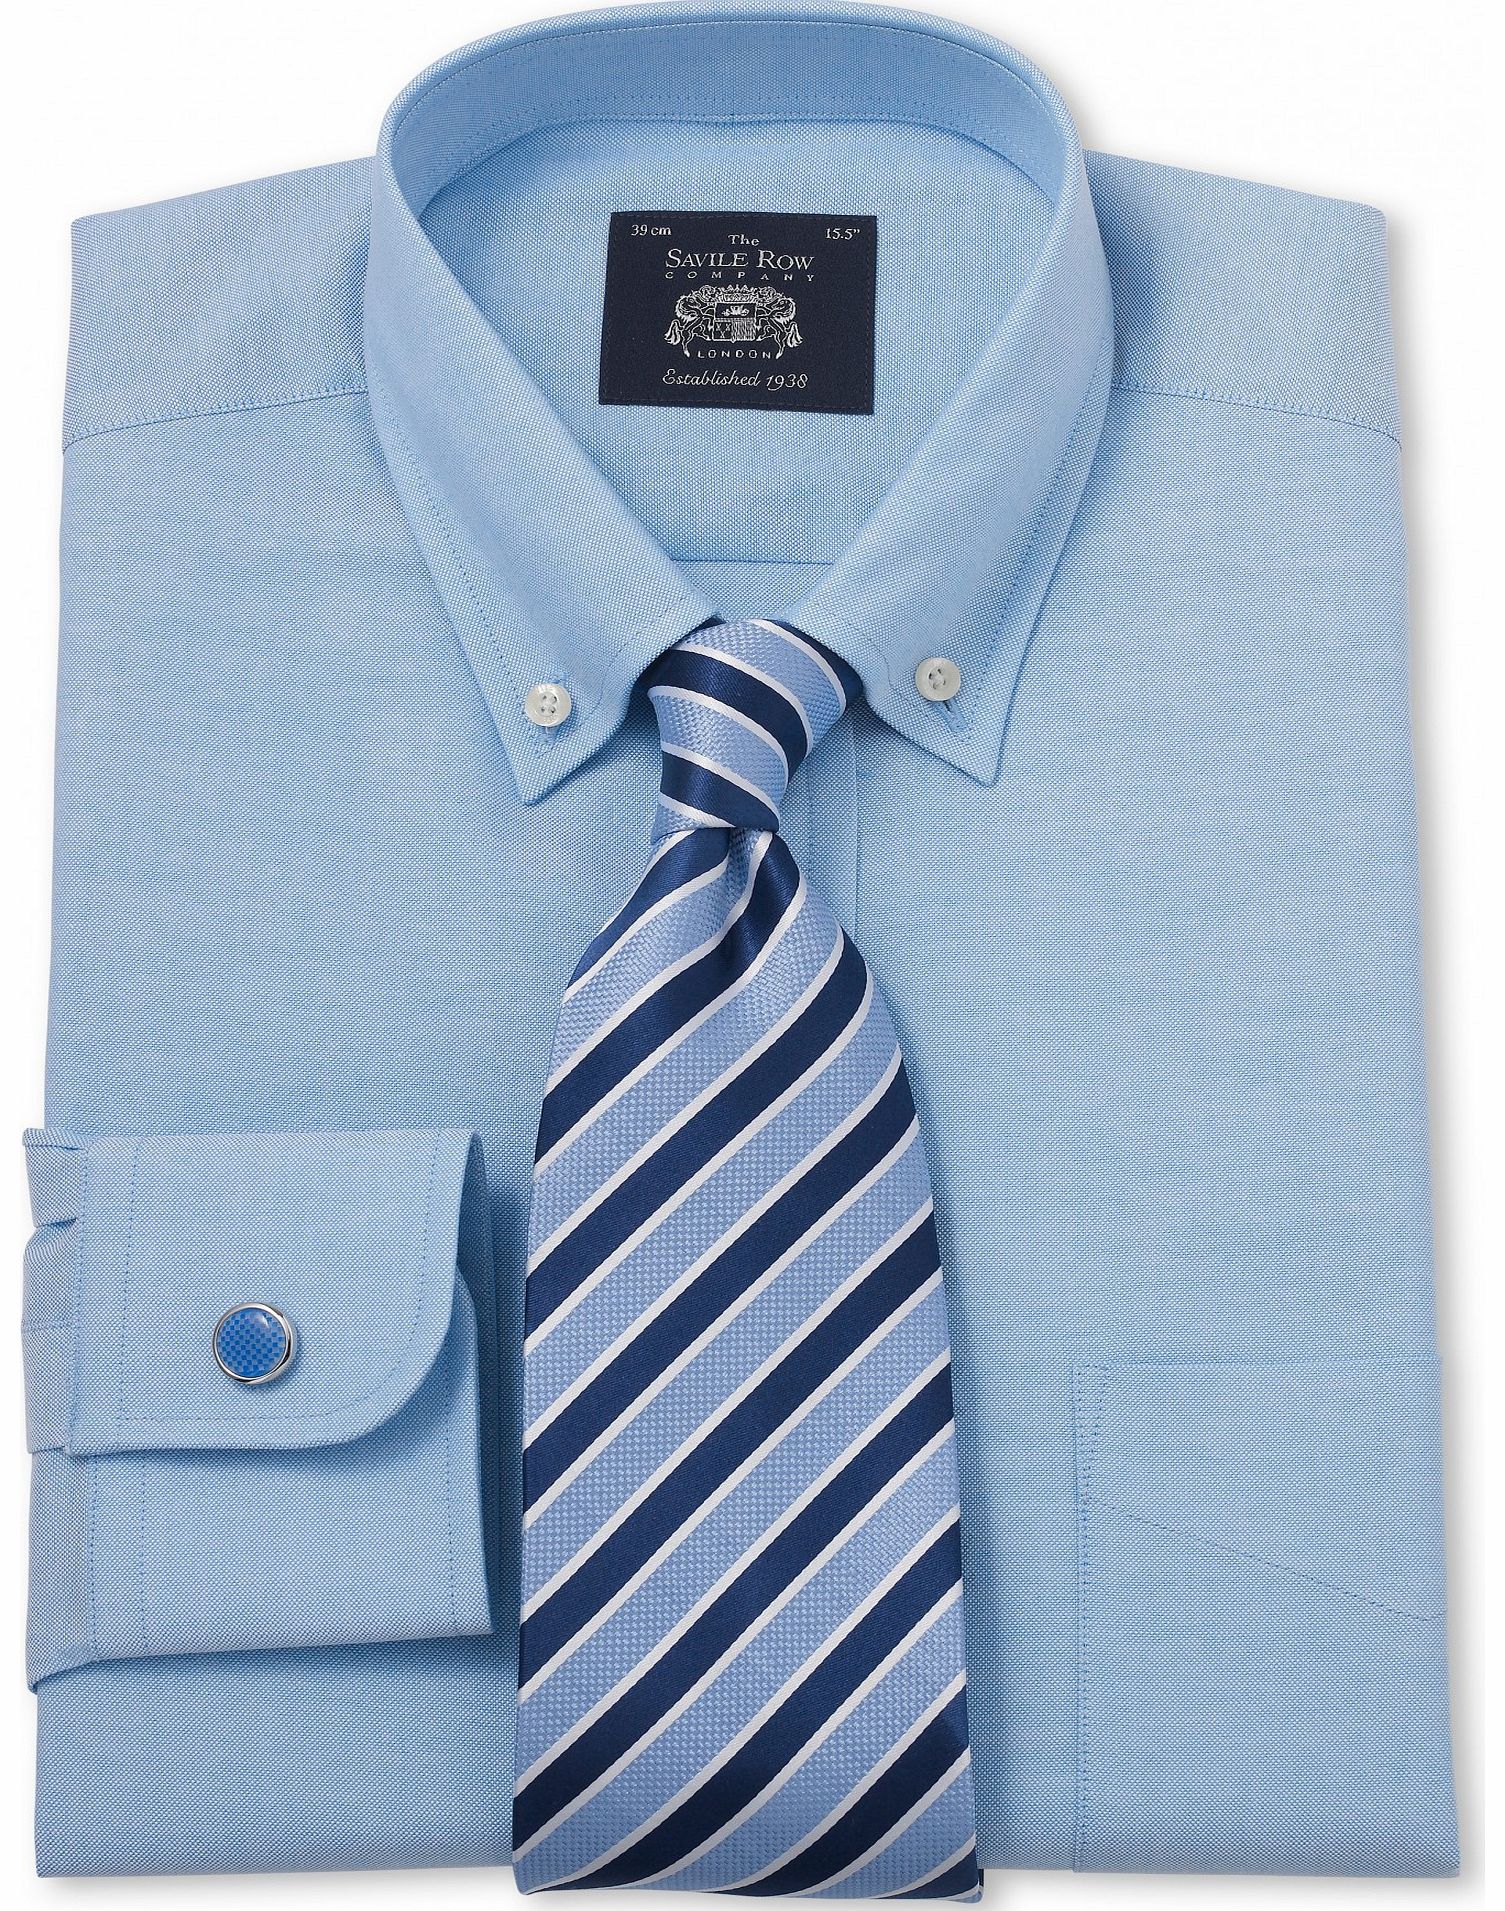 Savile Row Company Blue Pinpoint Classic Fit Shirt 16`` Lengthened